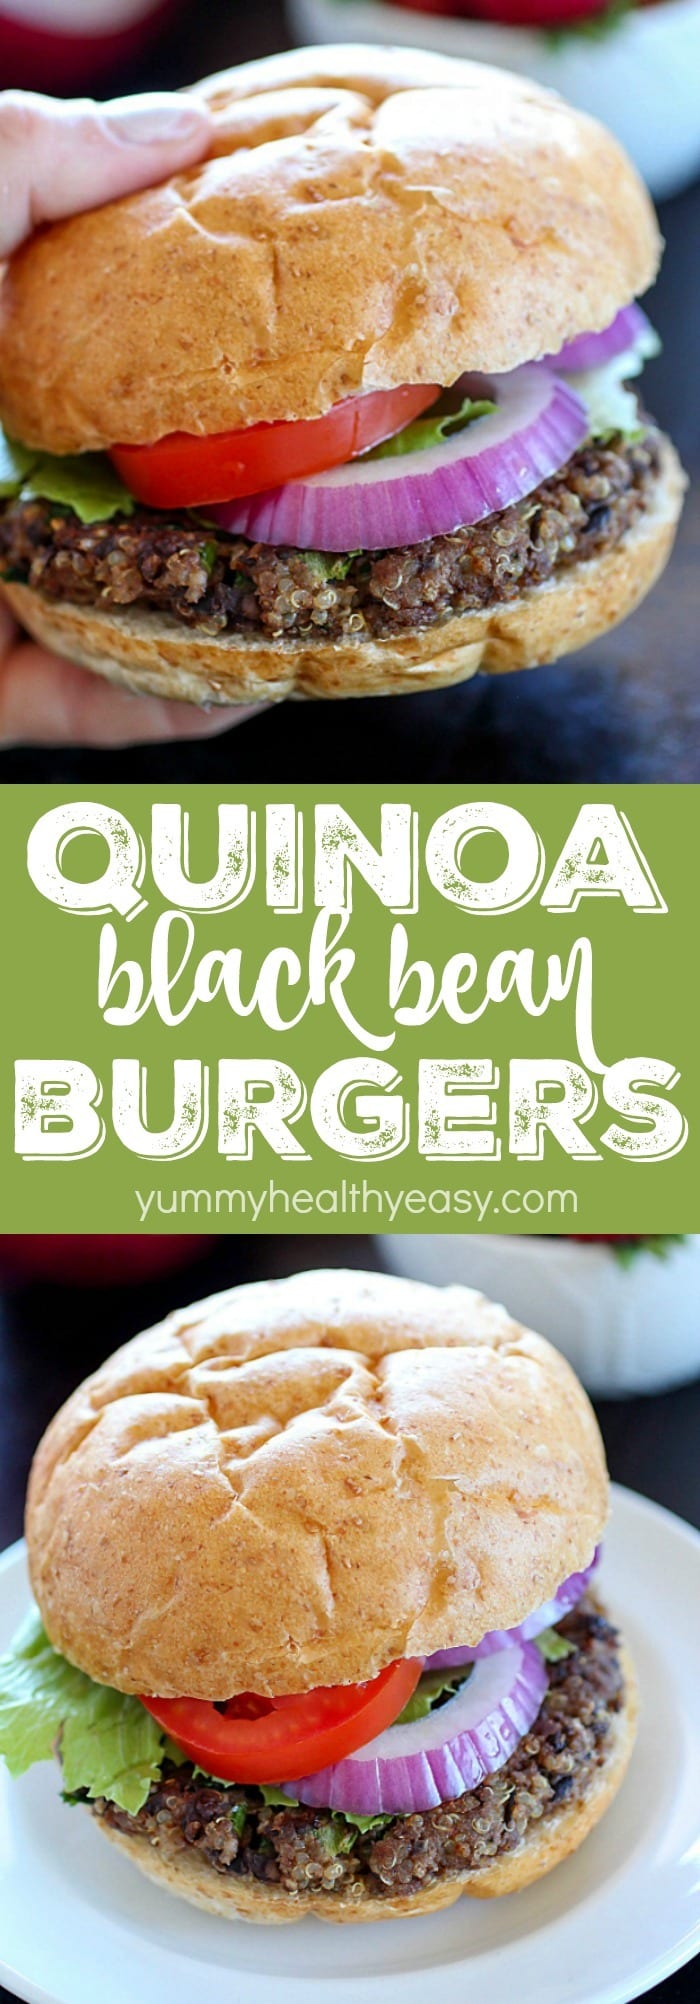 Quinoa Black Bean Burgers - meatless patties full of black beans, quinoa and spices. You won't believe these are vegetarian and won't miss the meat! The flavor is so incredibly delicious and only 270 calories per burger!